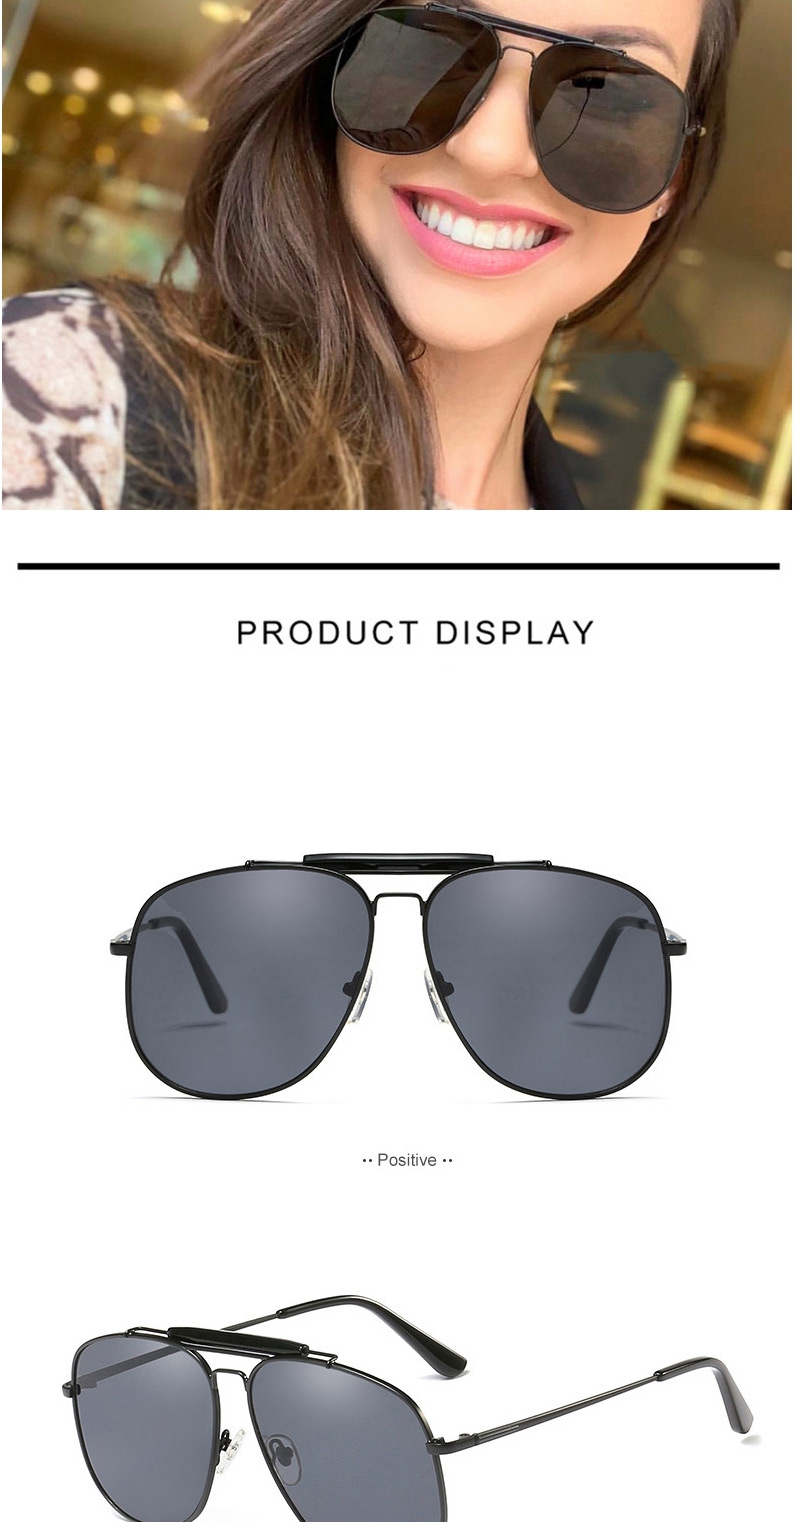 Fashion C3 Gold/powder Tablets Candy-colored Metal Sunglasses,Women Sunglasses